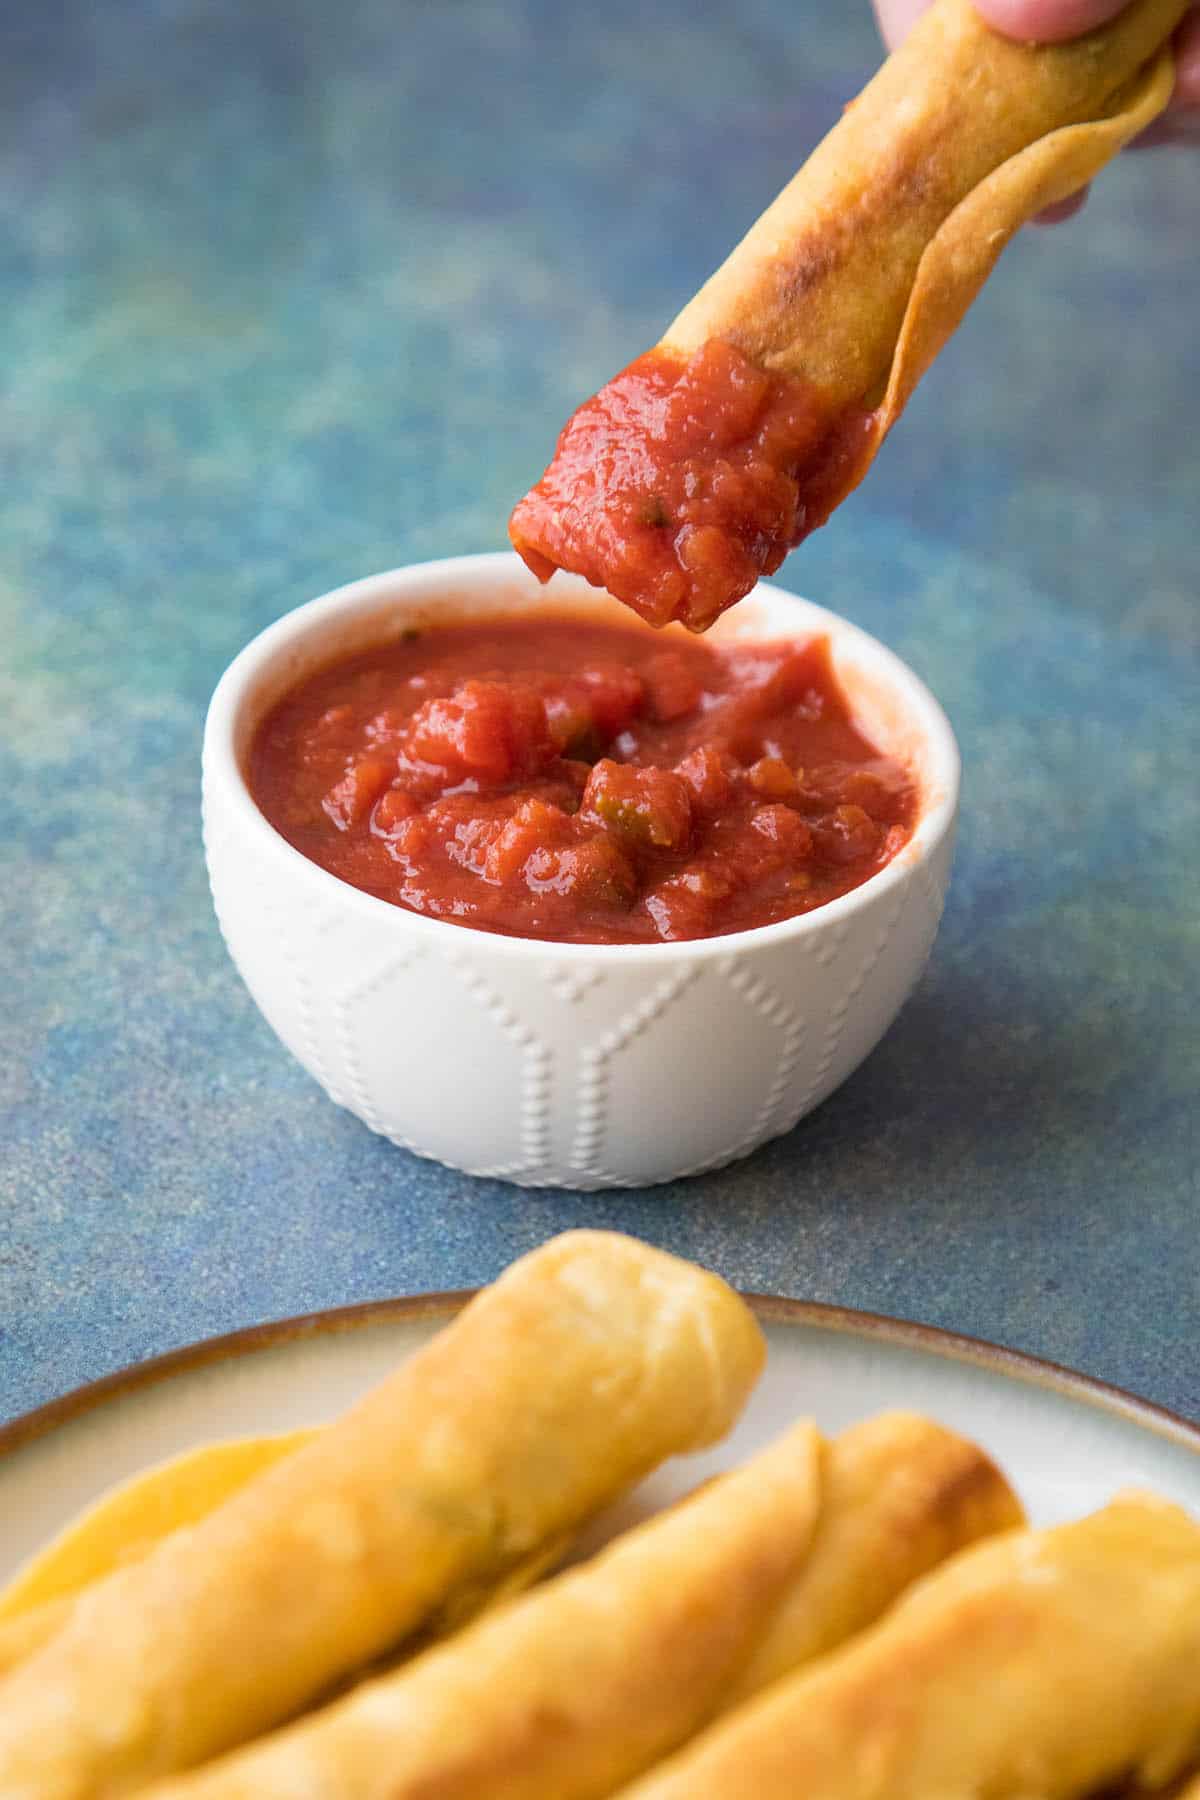 Chicken Taquitos - Dipped in salsa